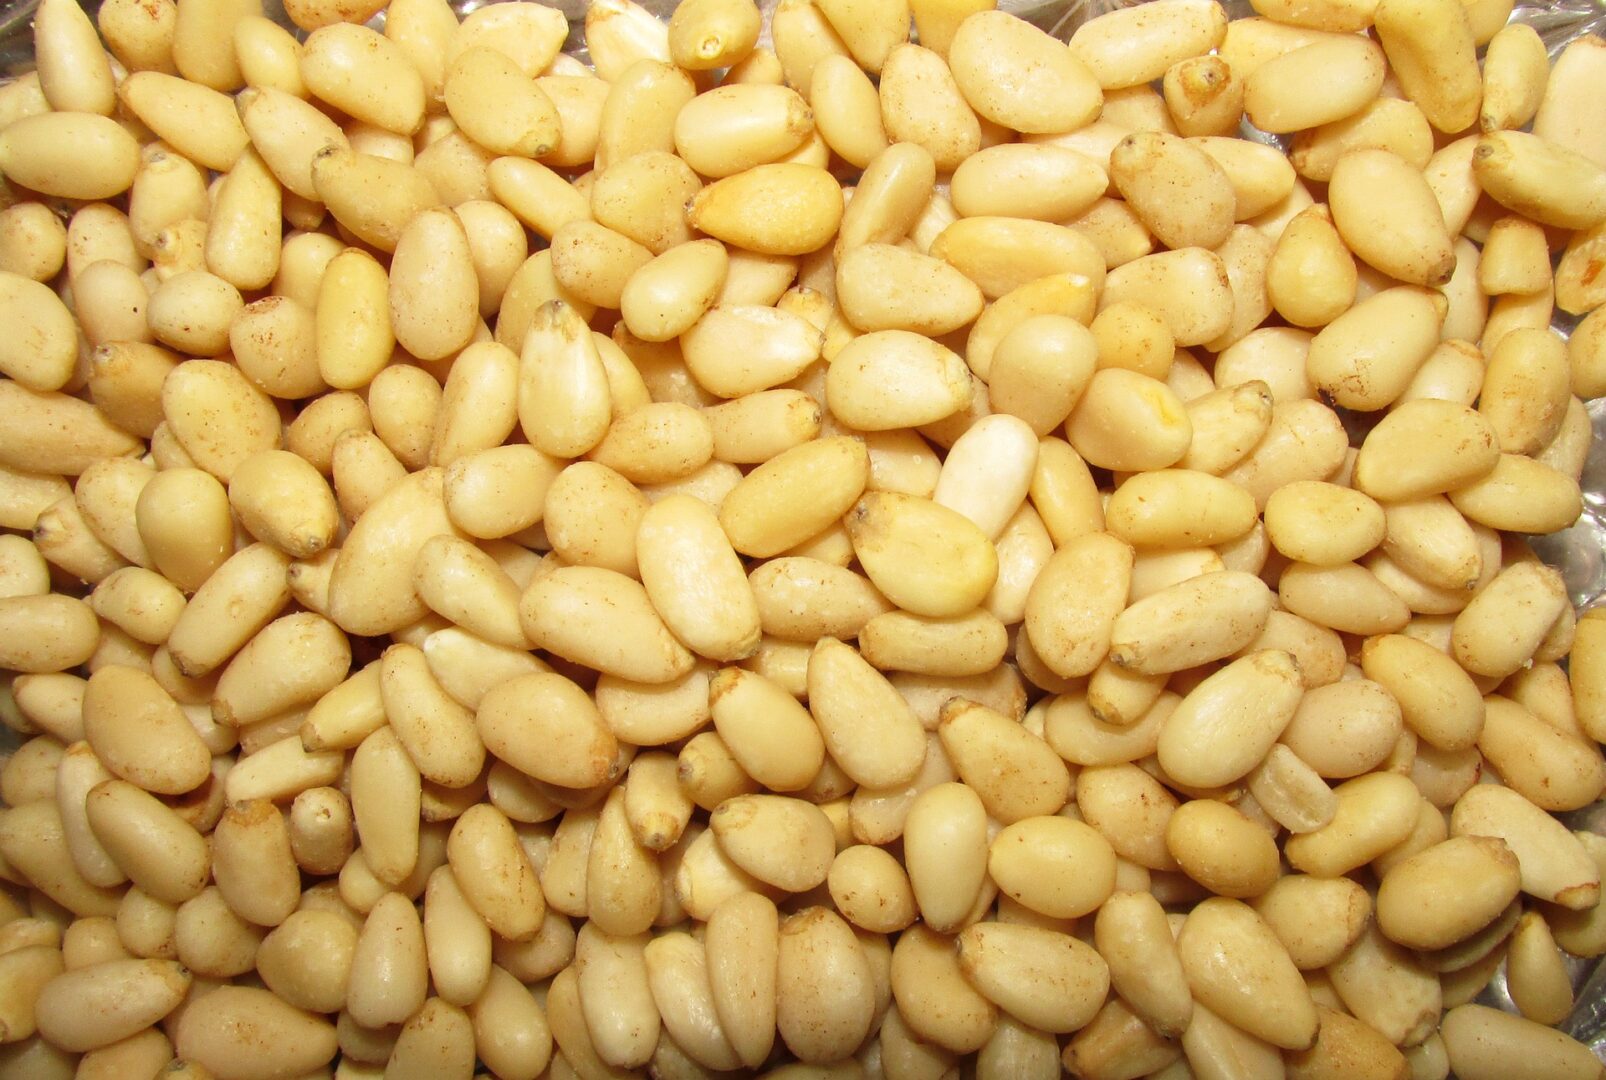 are pine nuts safe for dogs